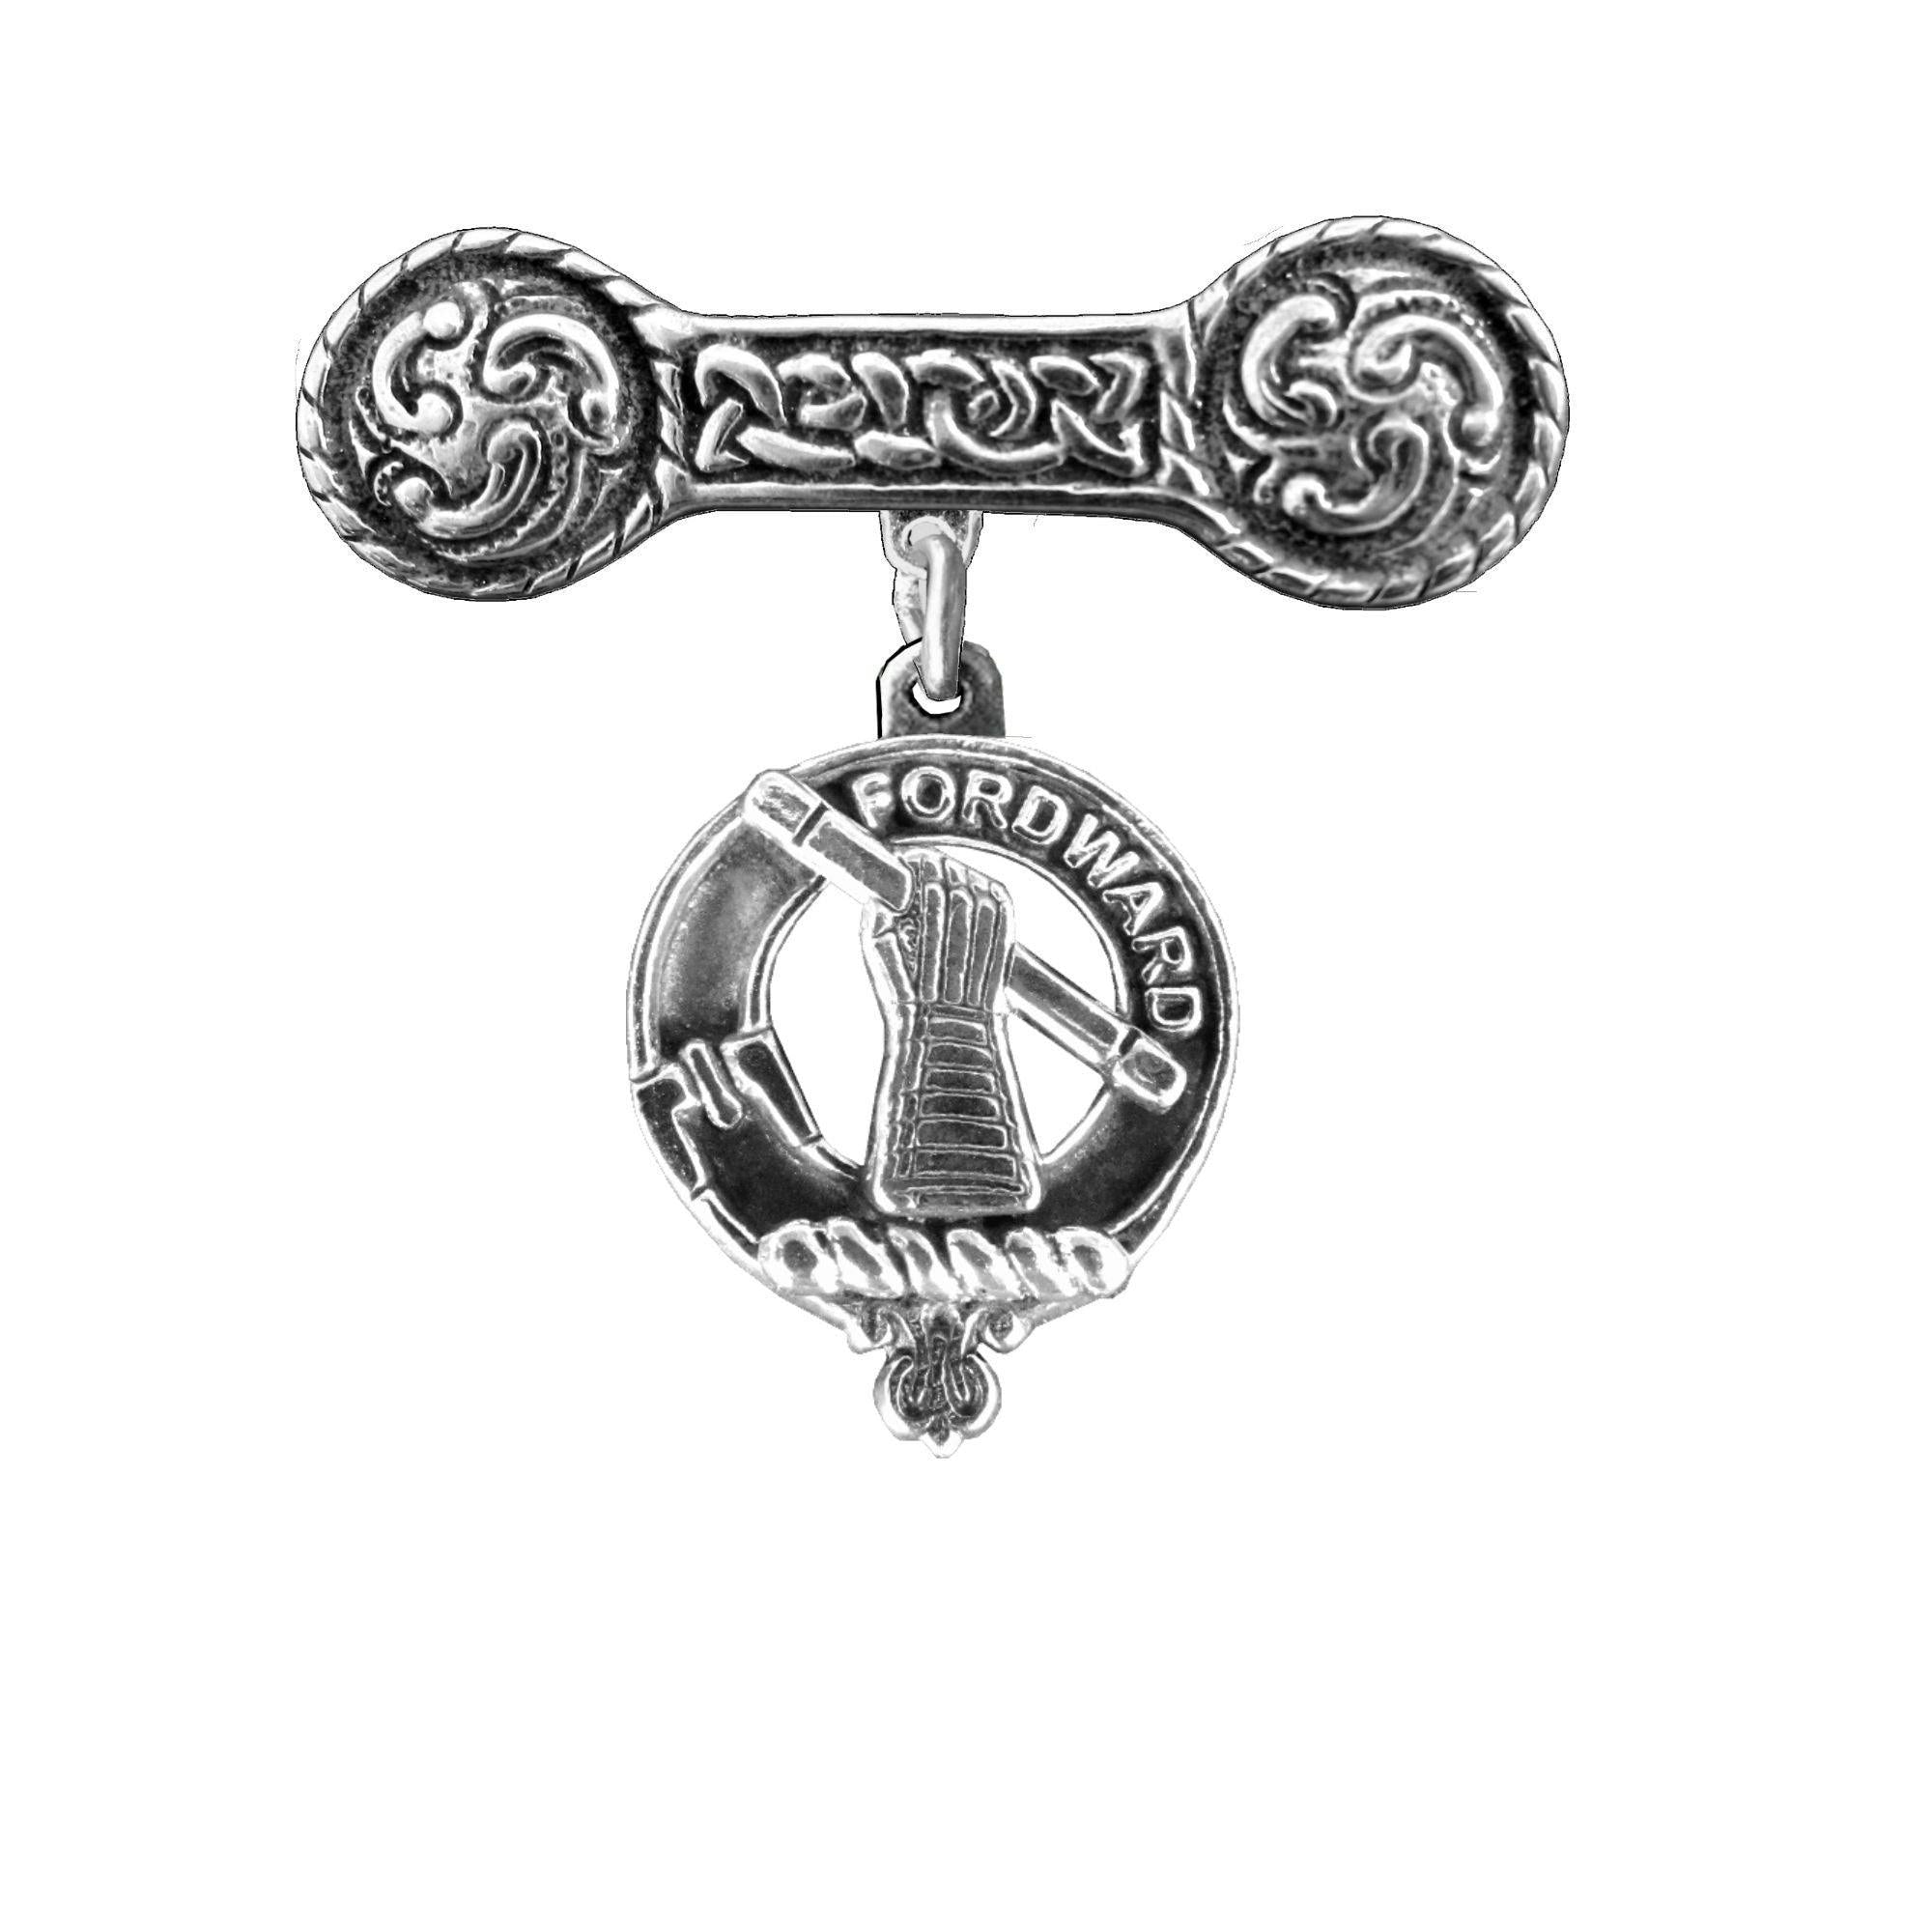 Balfour Clan Crest Iona Bar Brooch - Sterling Silver